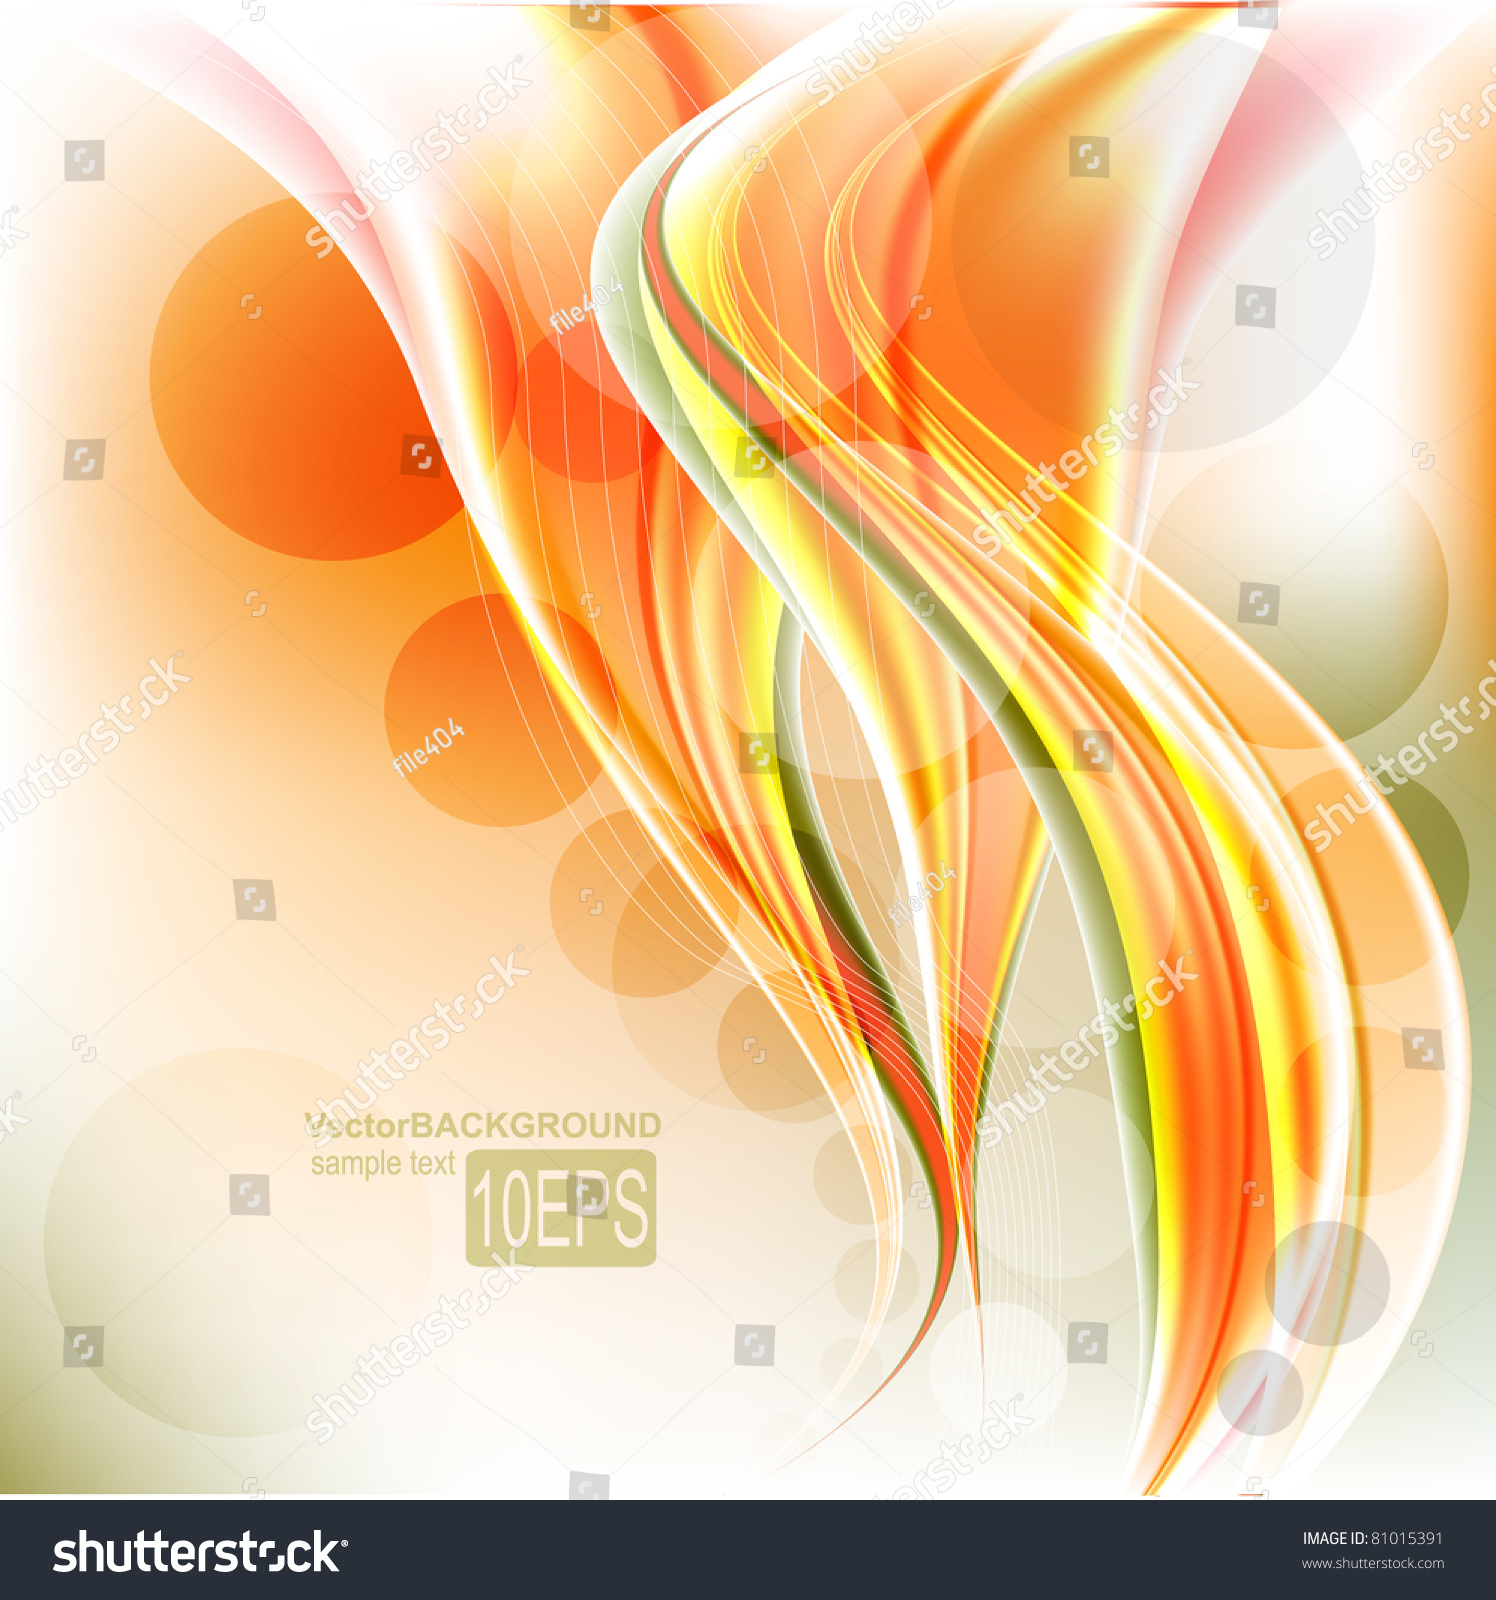 Abstract Vector Wave - 81015391 : Shutterstock